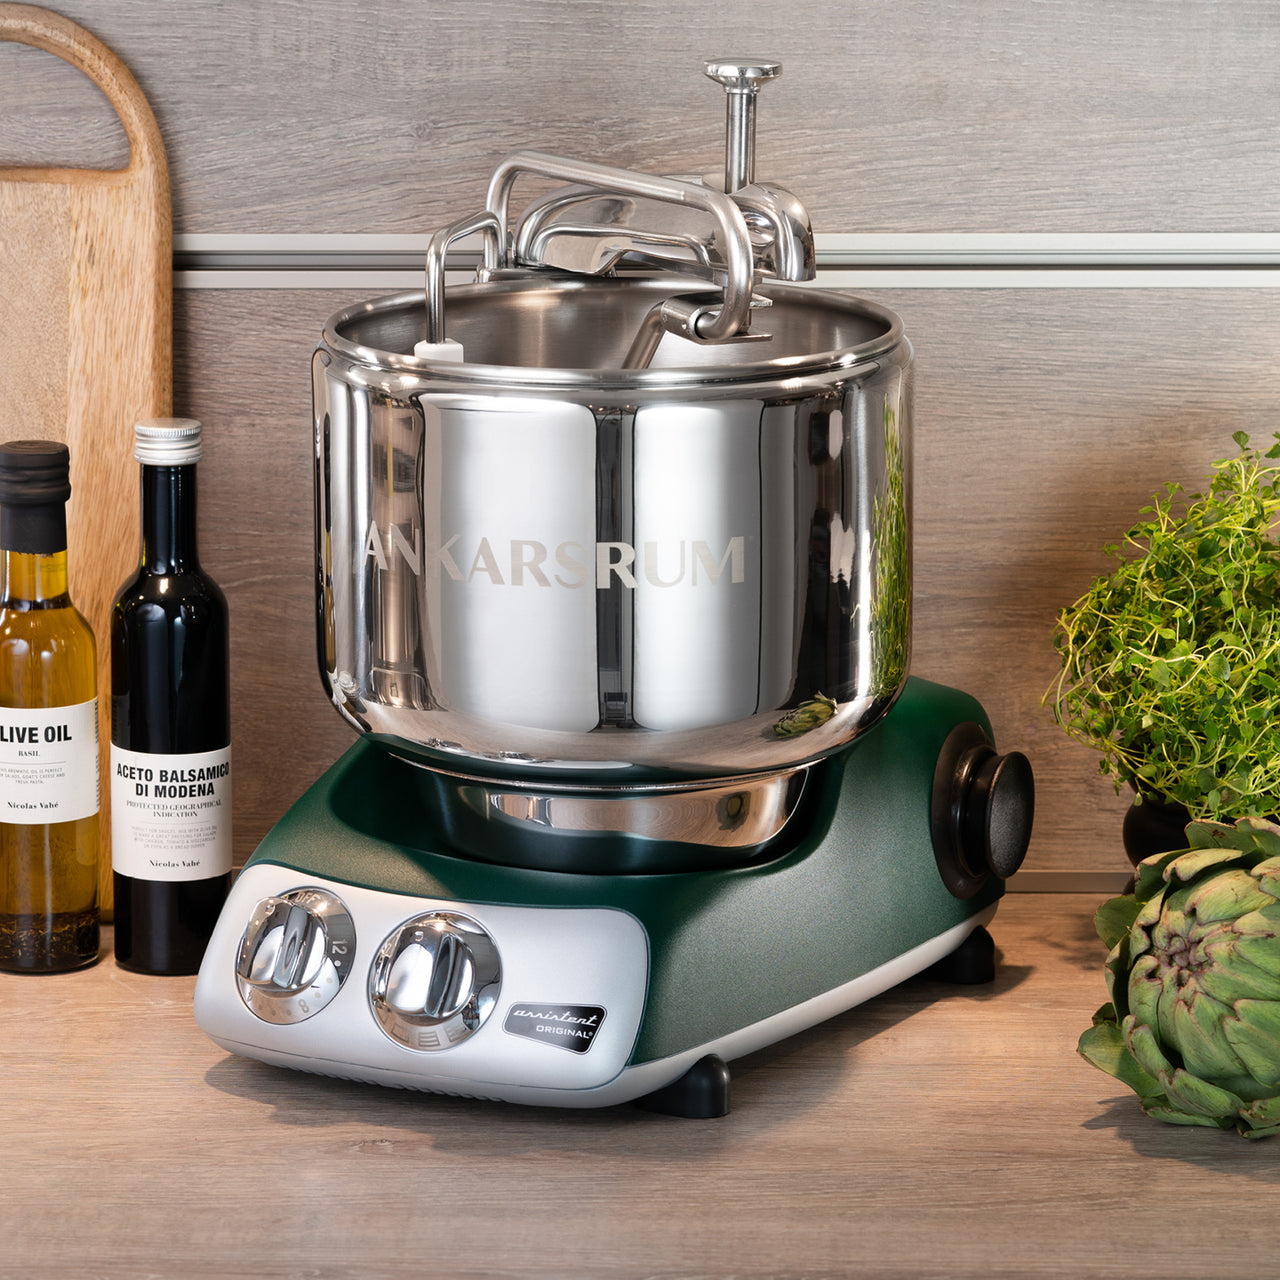 The Kitchn Reviews the Ankarsrum Original Kitchen Machine: Part I – The  Mixer, the Citrus Juicer, and the Blender